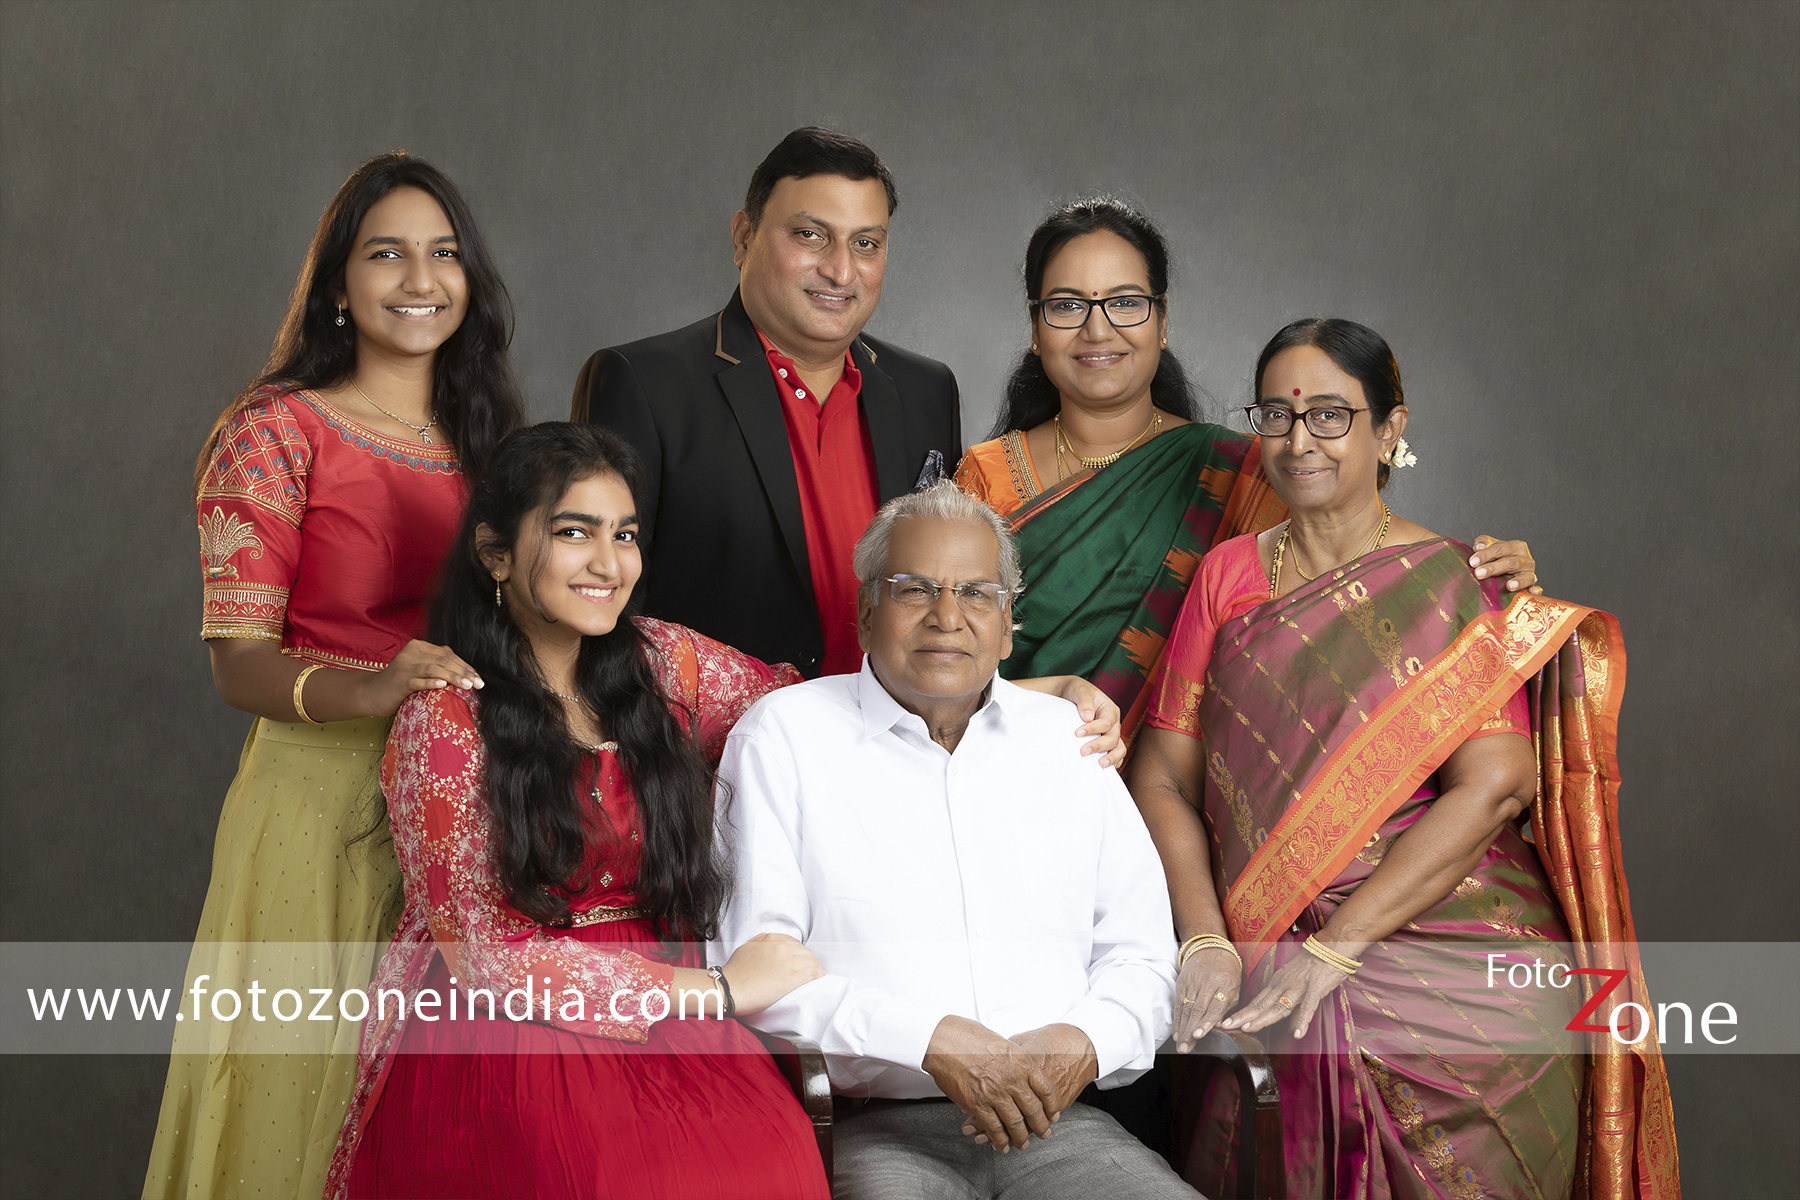 Portrait Indian Family Together Traditional Costumes Stock Photo 669134038  | Shutterstock